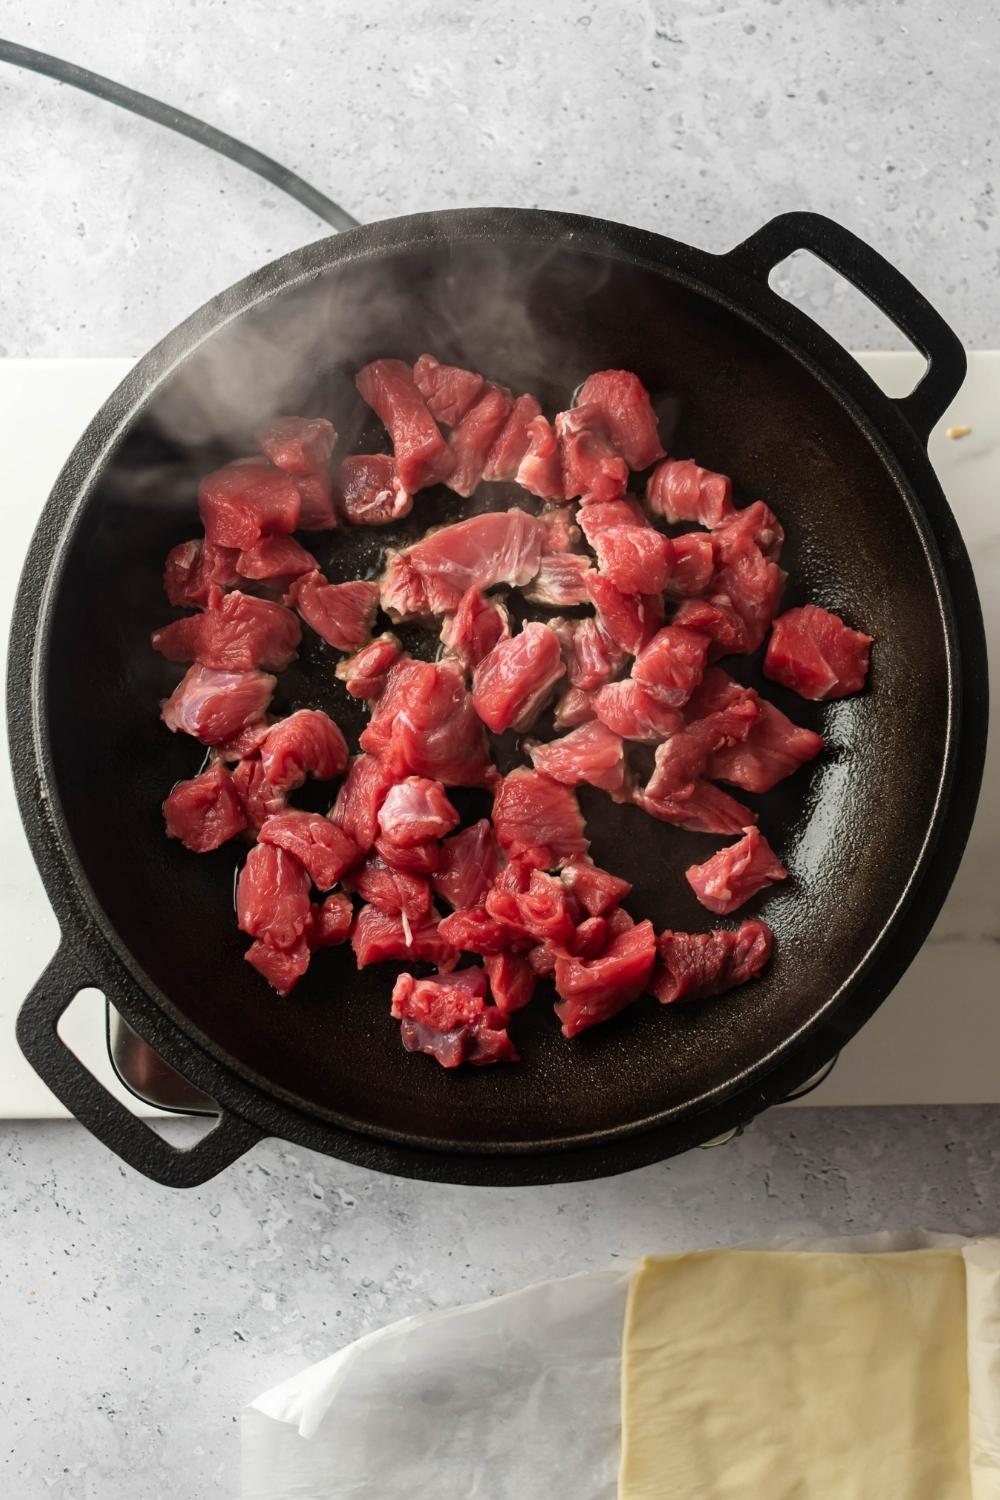 An overhead view of raw beef chunks being cooked in an iron pot.